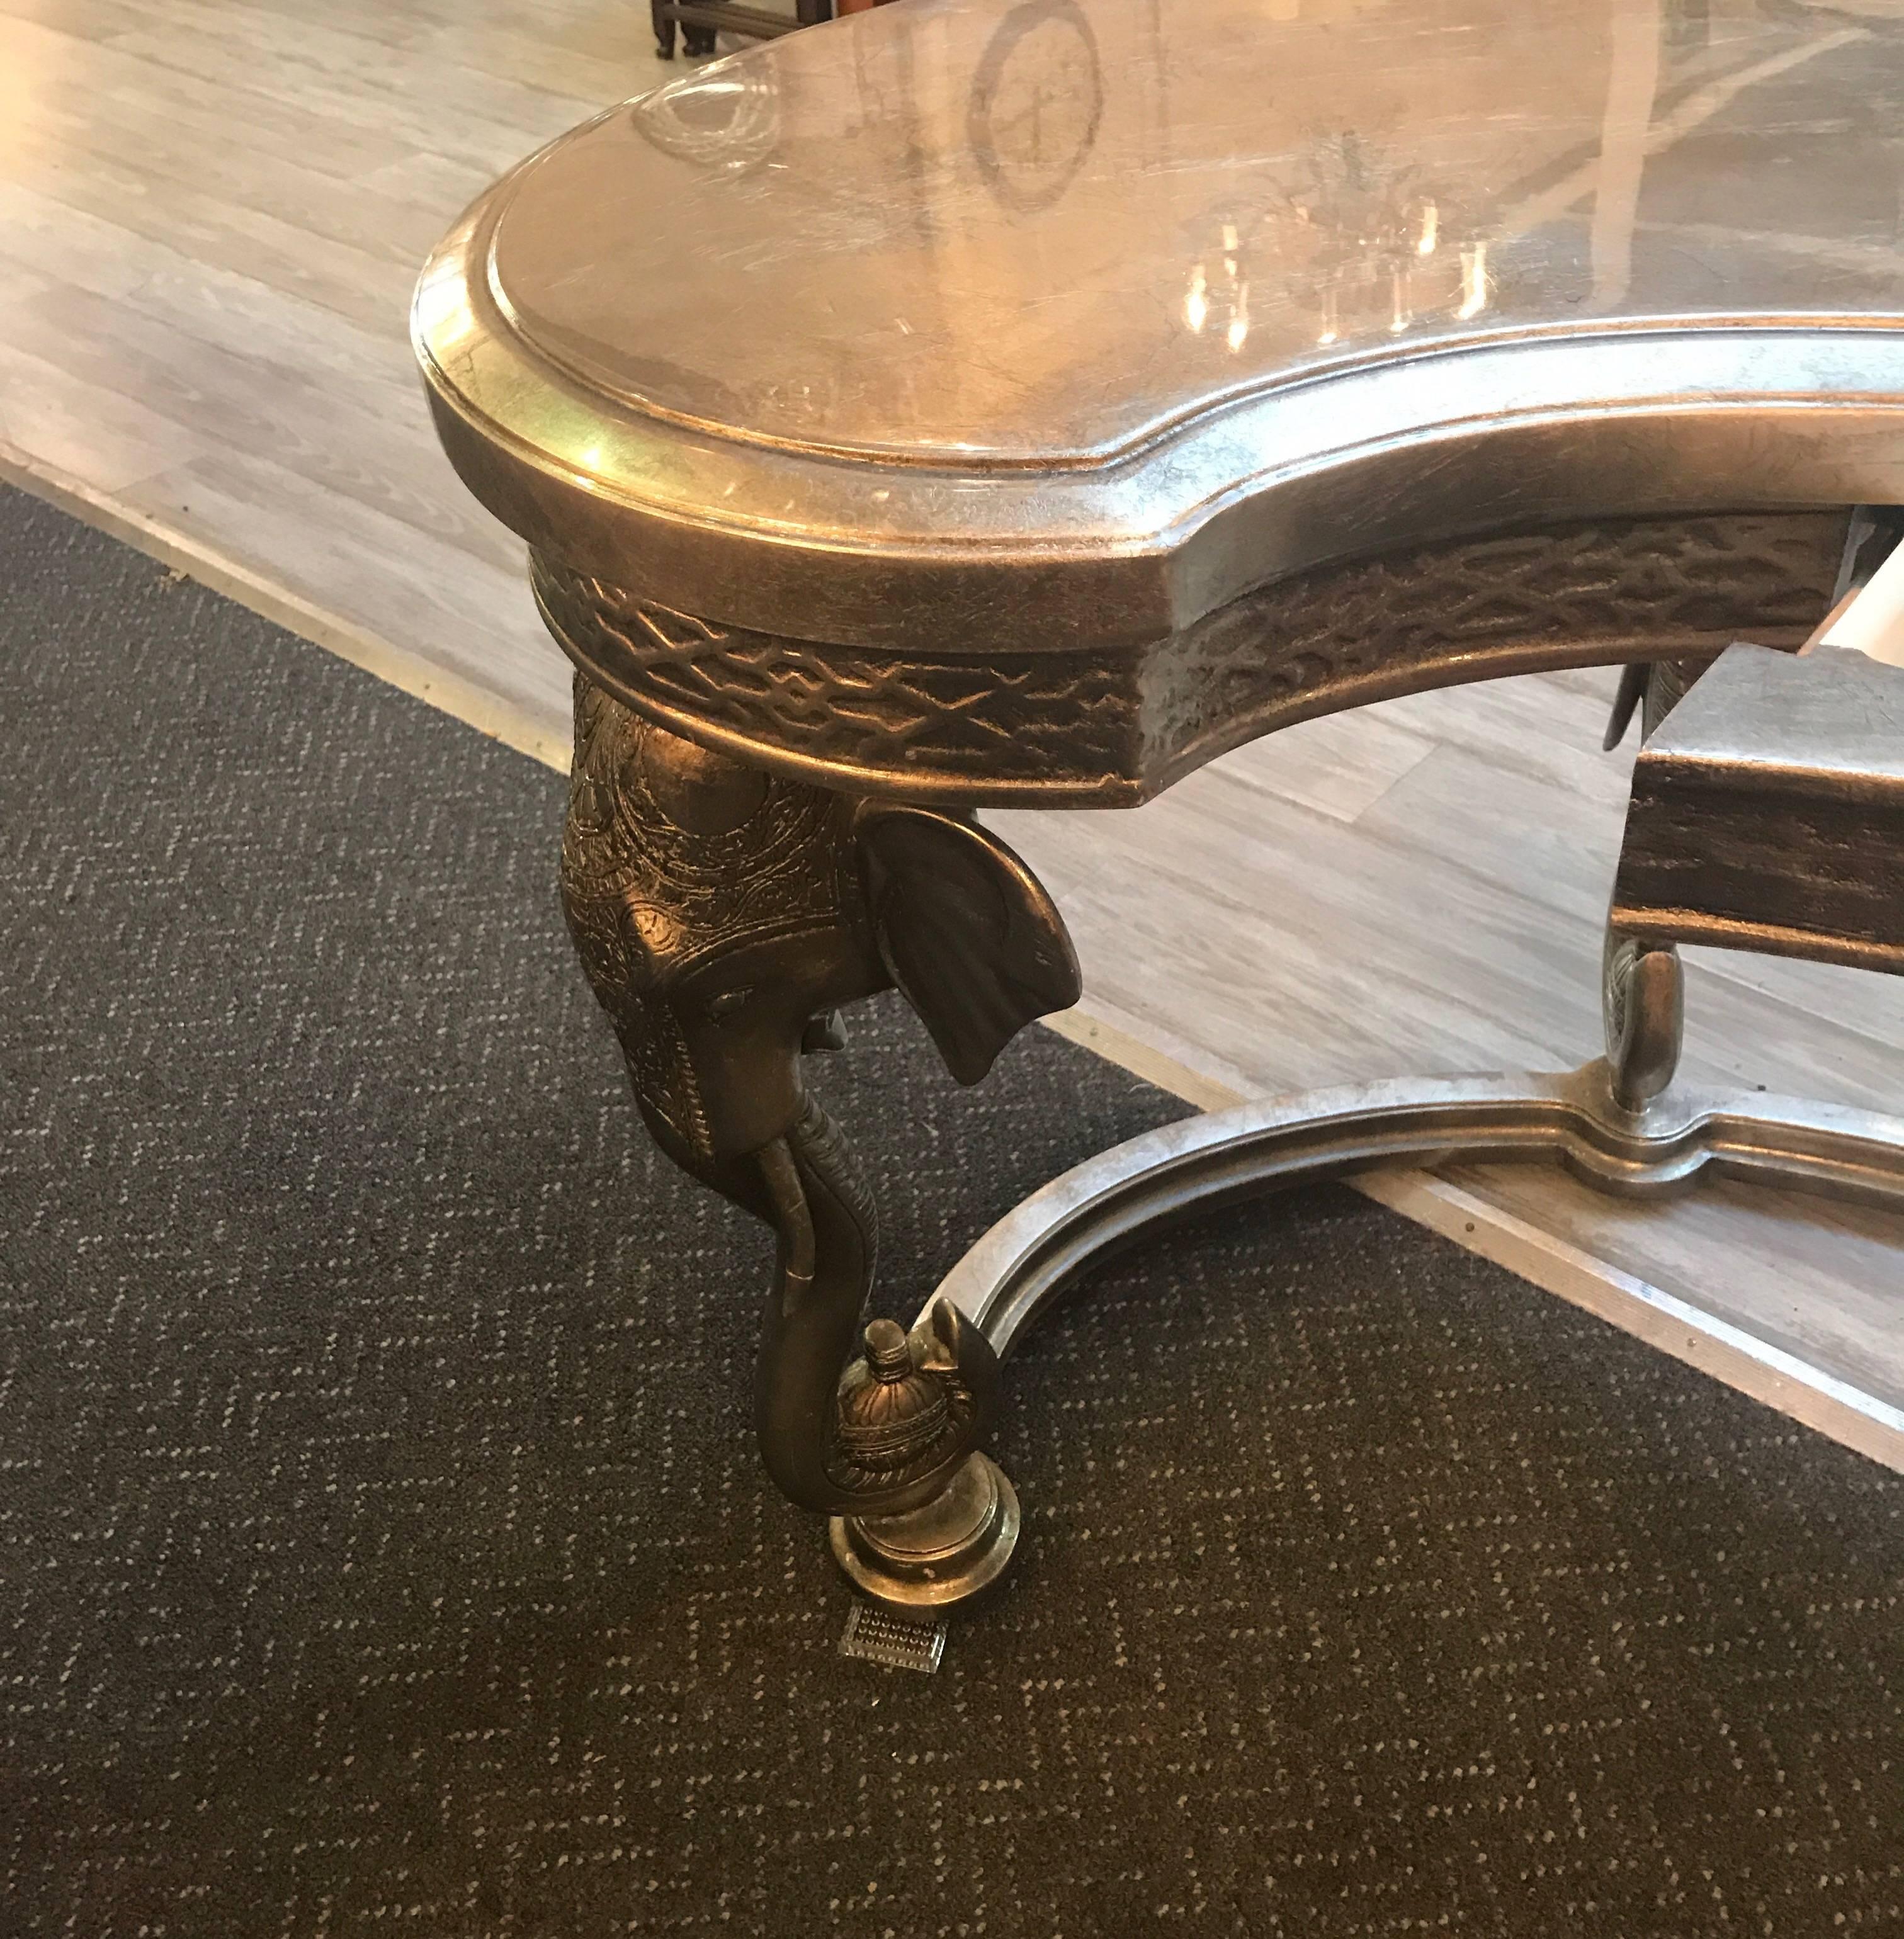 High style silver leaf kidney shaped witting desk with elephant motif legs. The glossy top with one central drawer supported by four elephant head legs. Made by Maitland Smith.